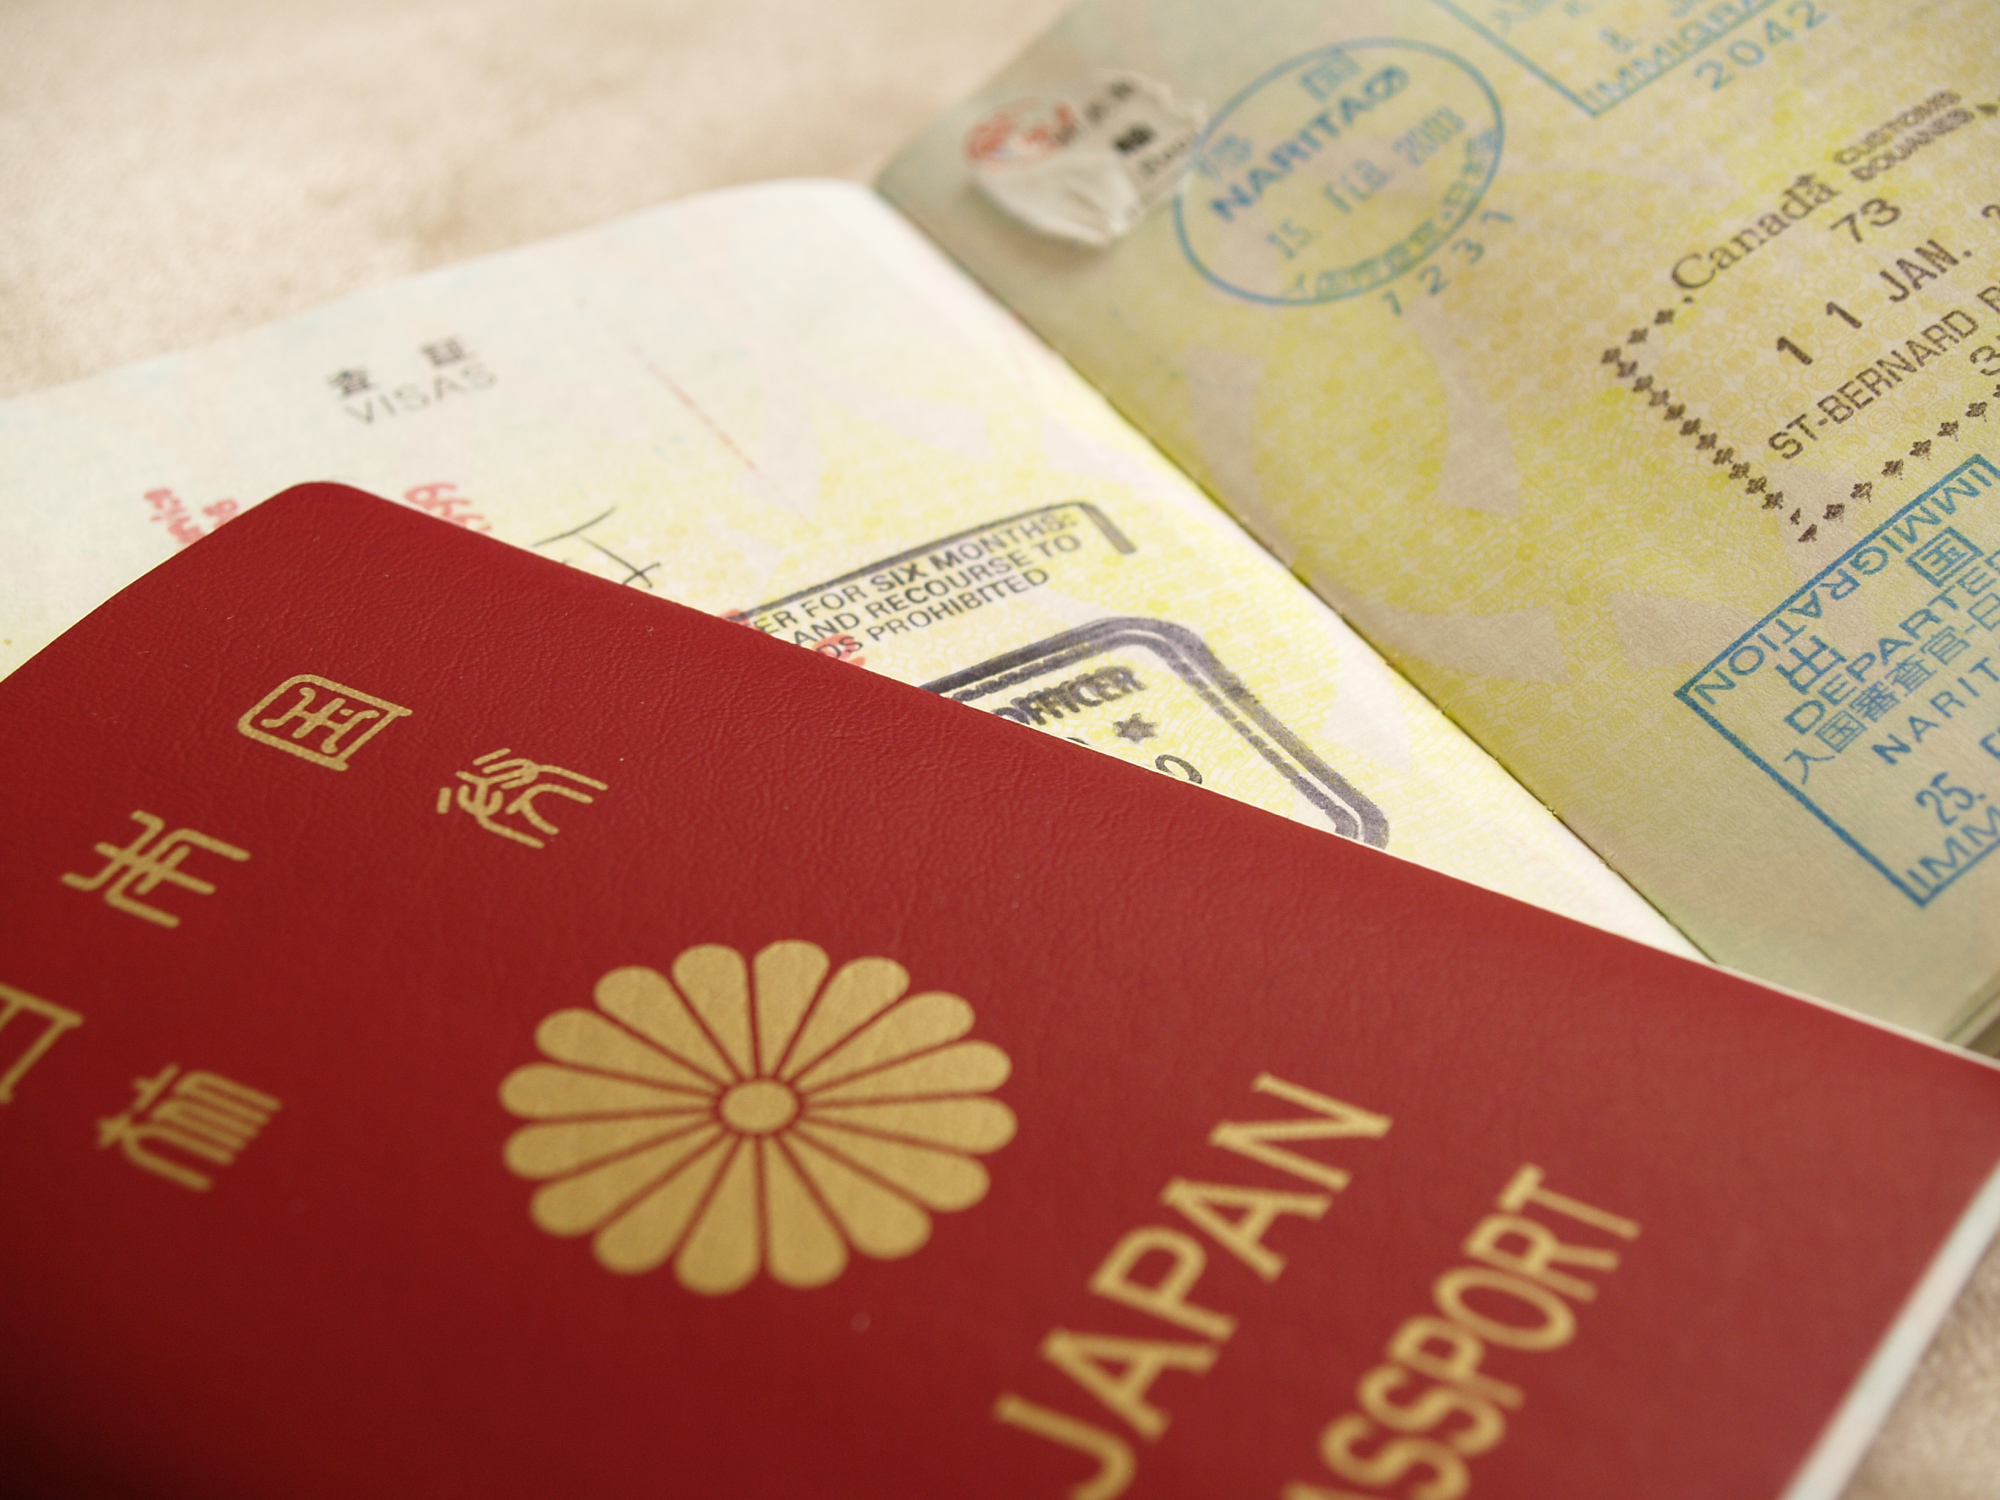 The government plans to ease passport regulations by enabling married Japanese women to include their maiden names on their passports. | ISTOCK